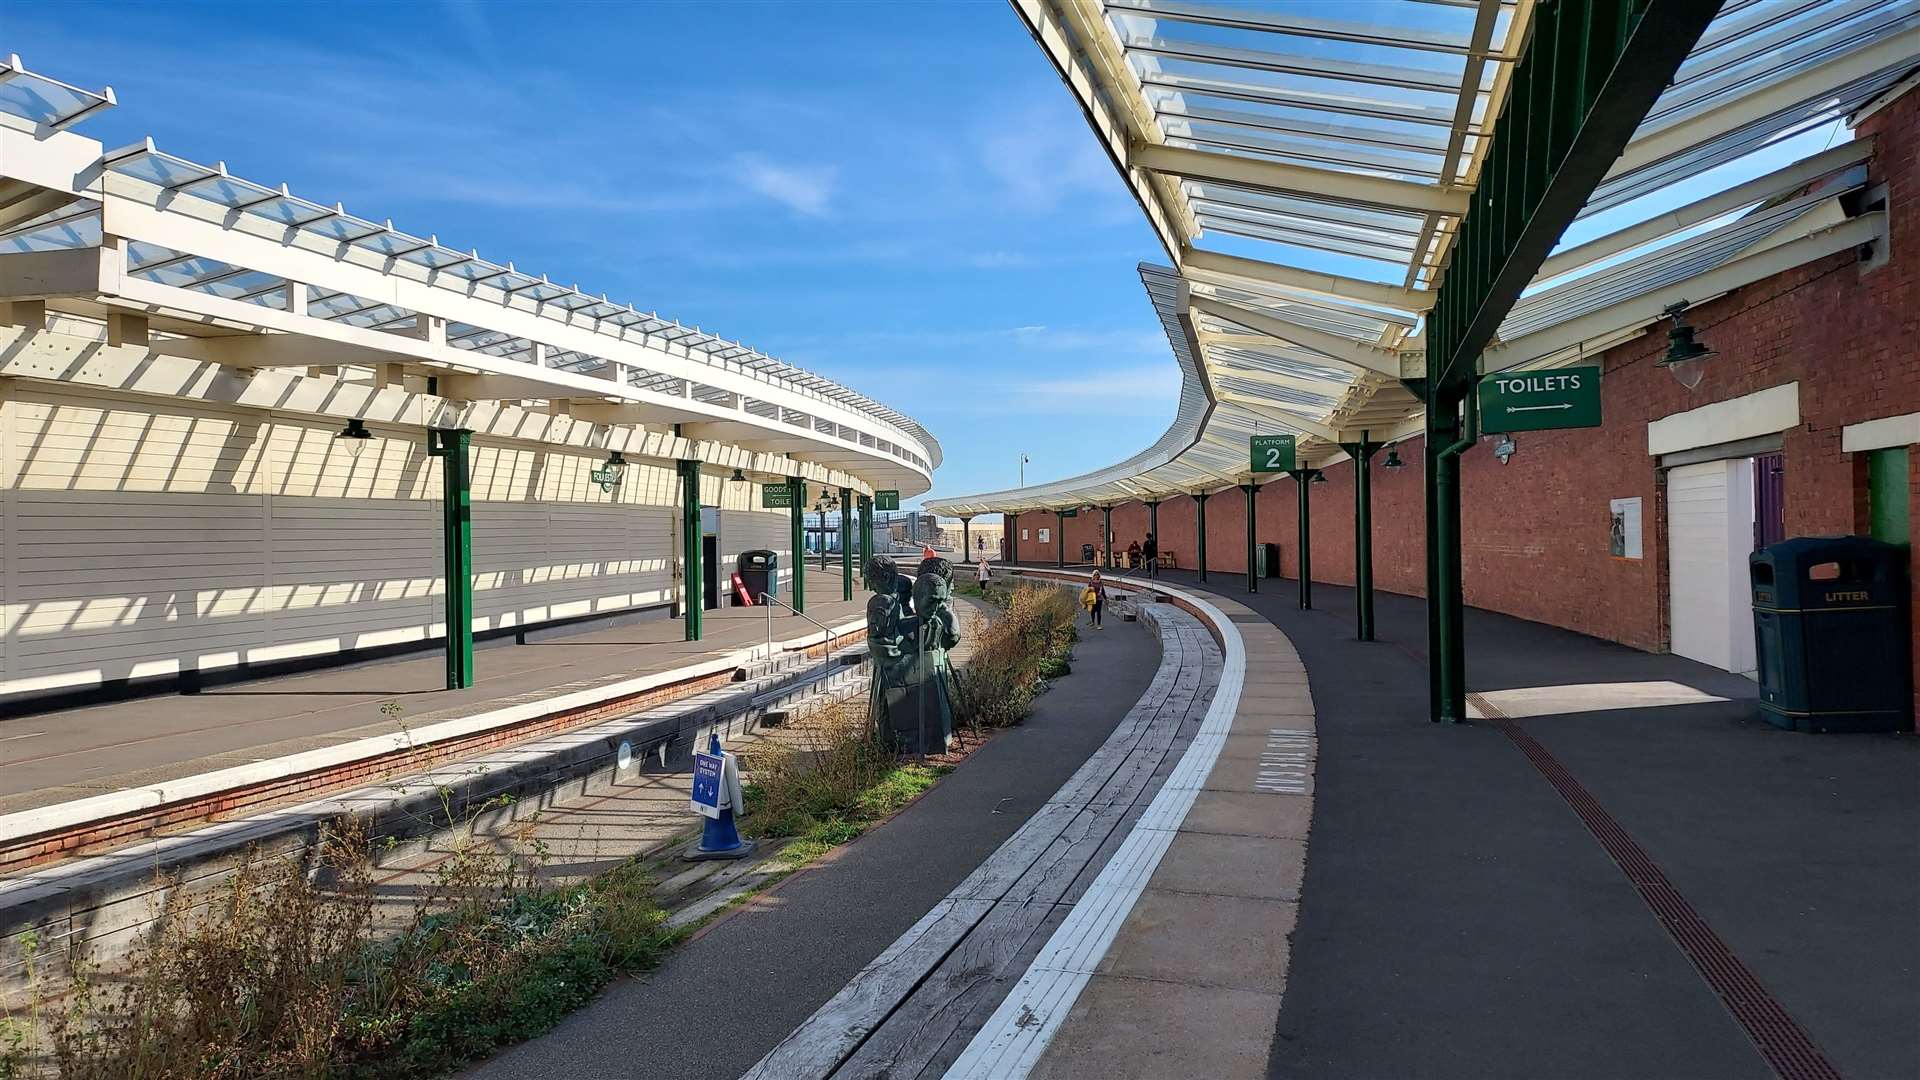 The Harbour Station was renovated as part of the rejuvenation of the Harbour Arm in 2015